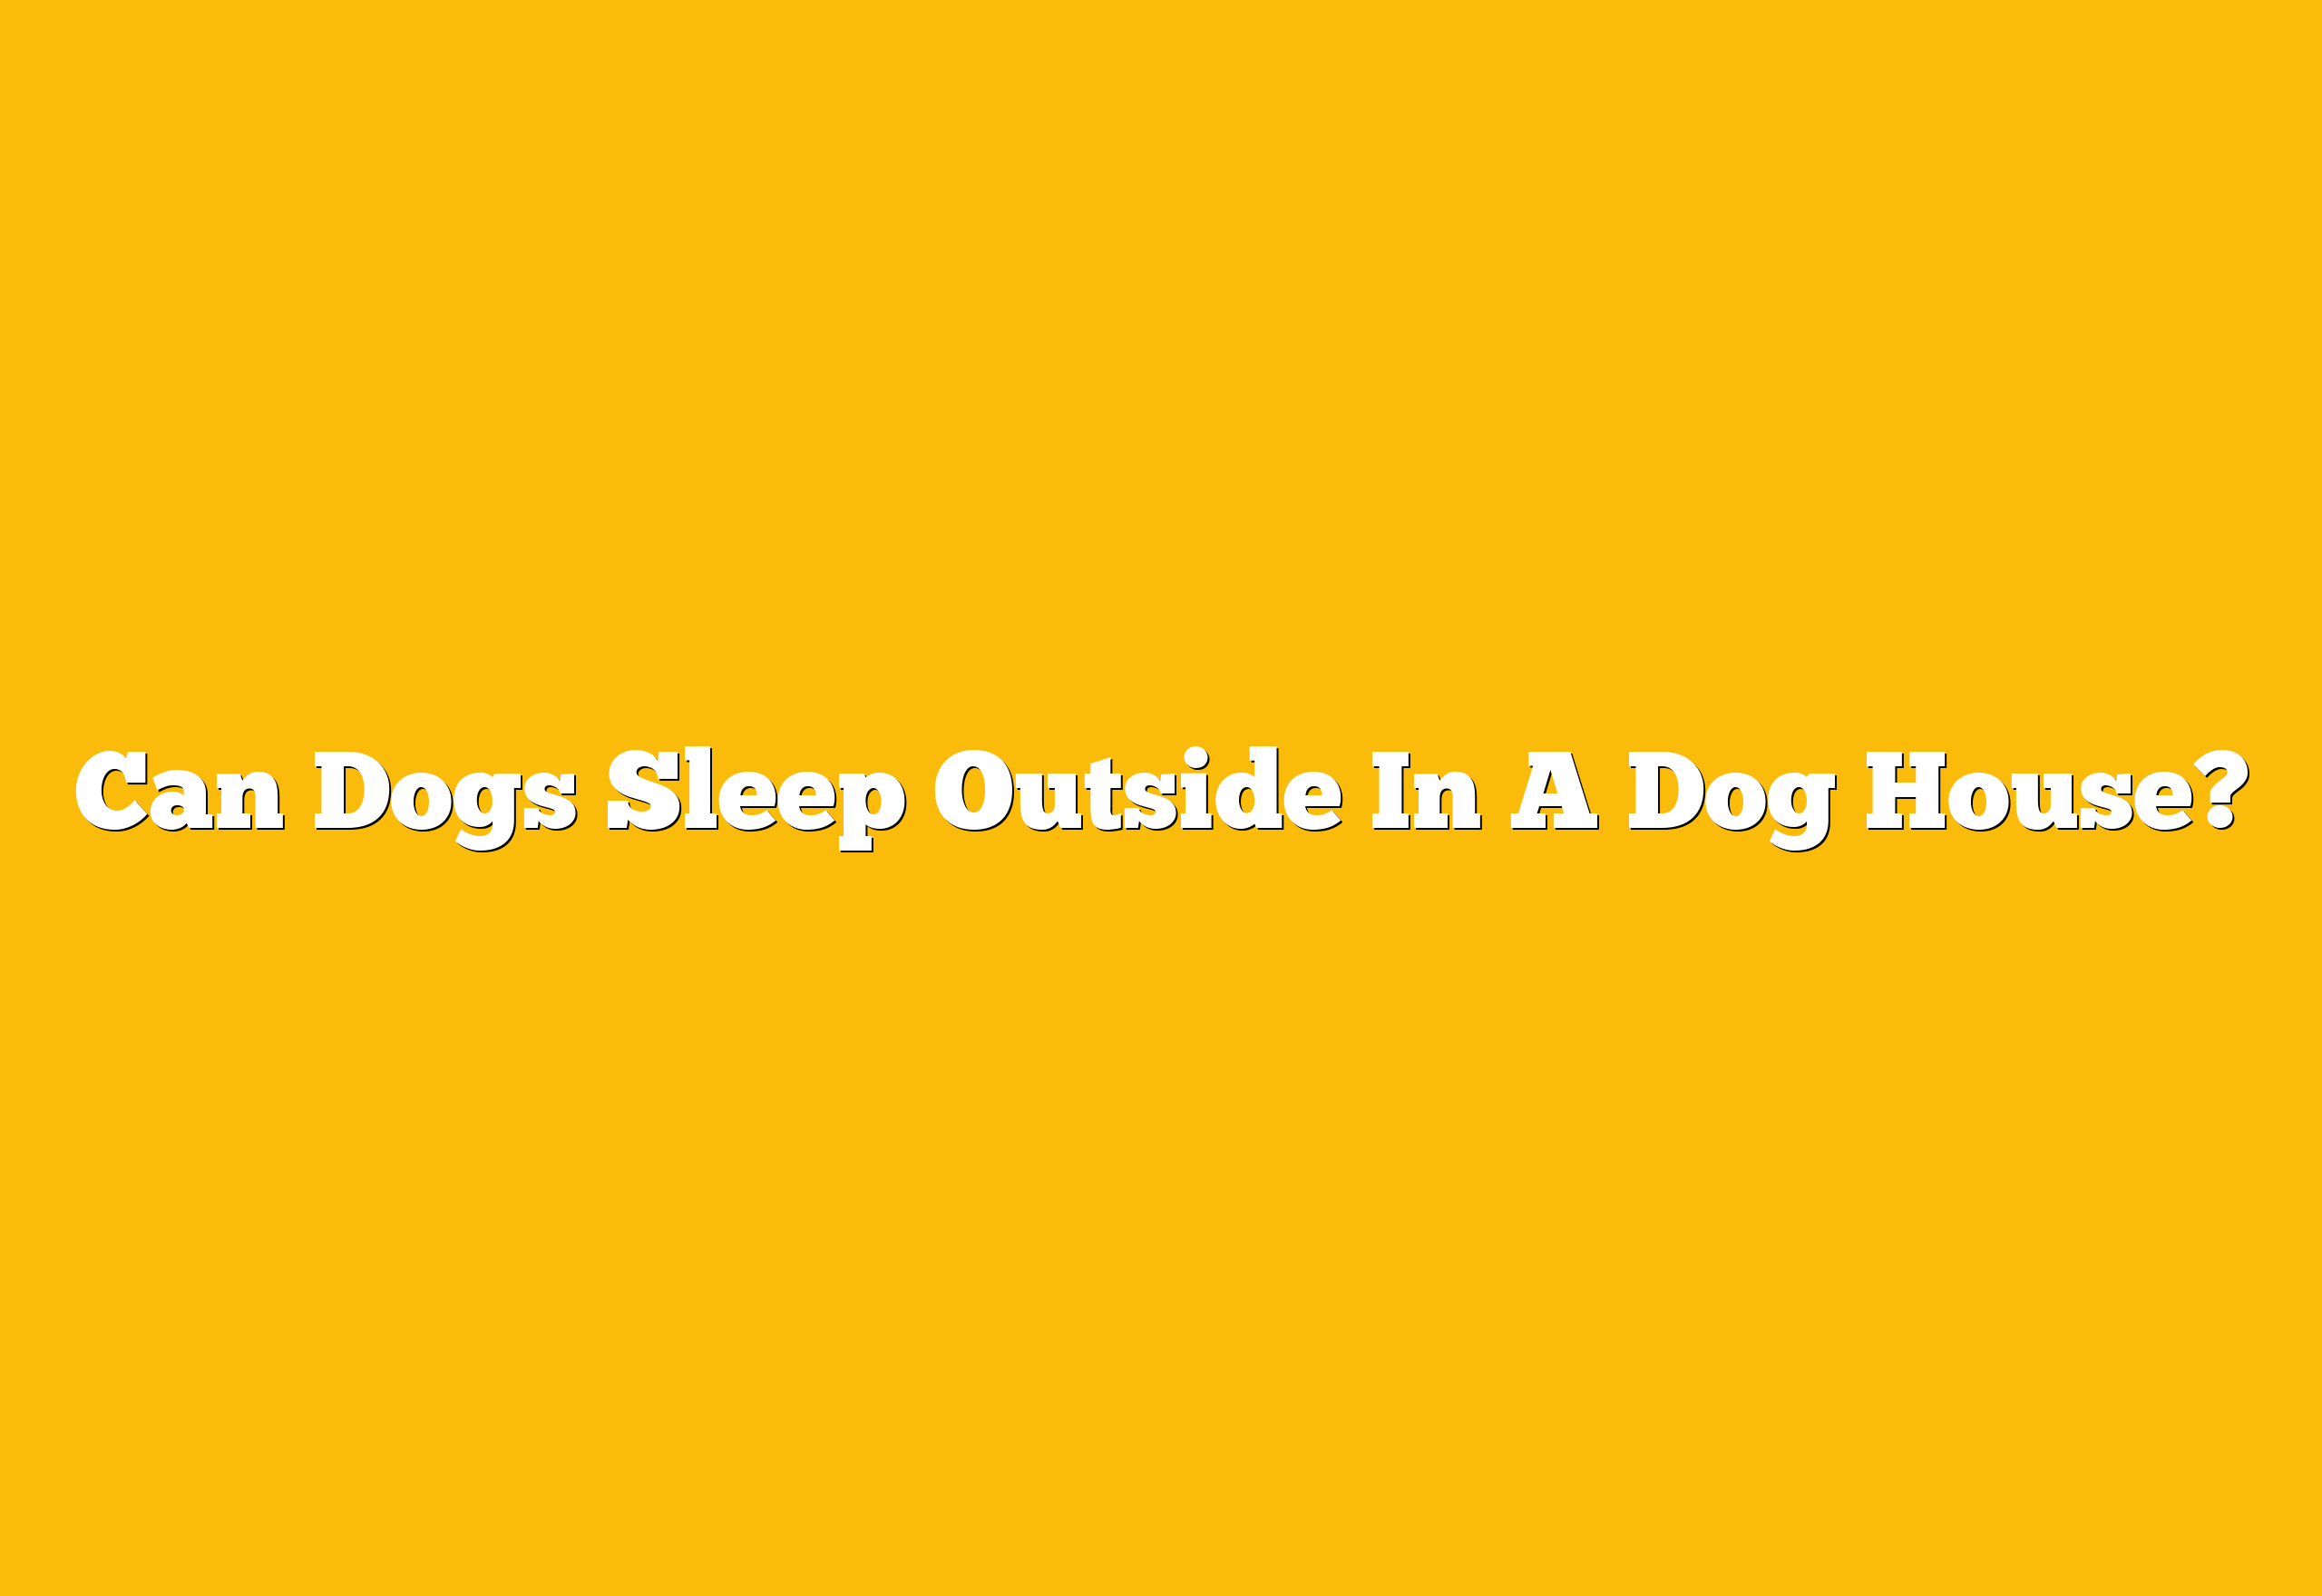 Can Dogs Sleep Outside In A Dog House?